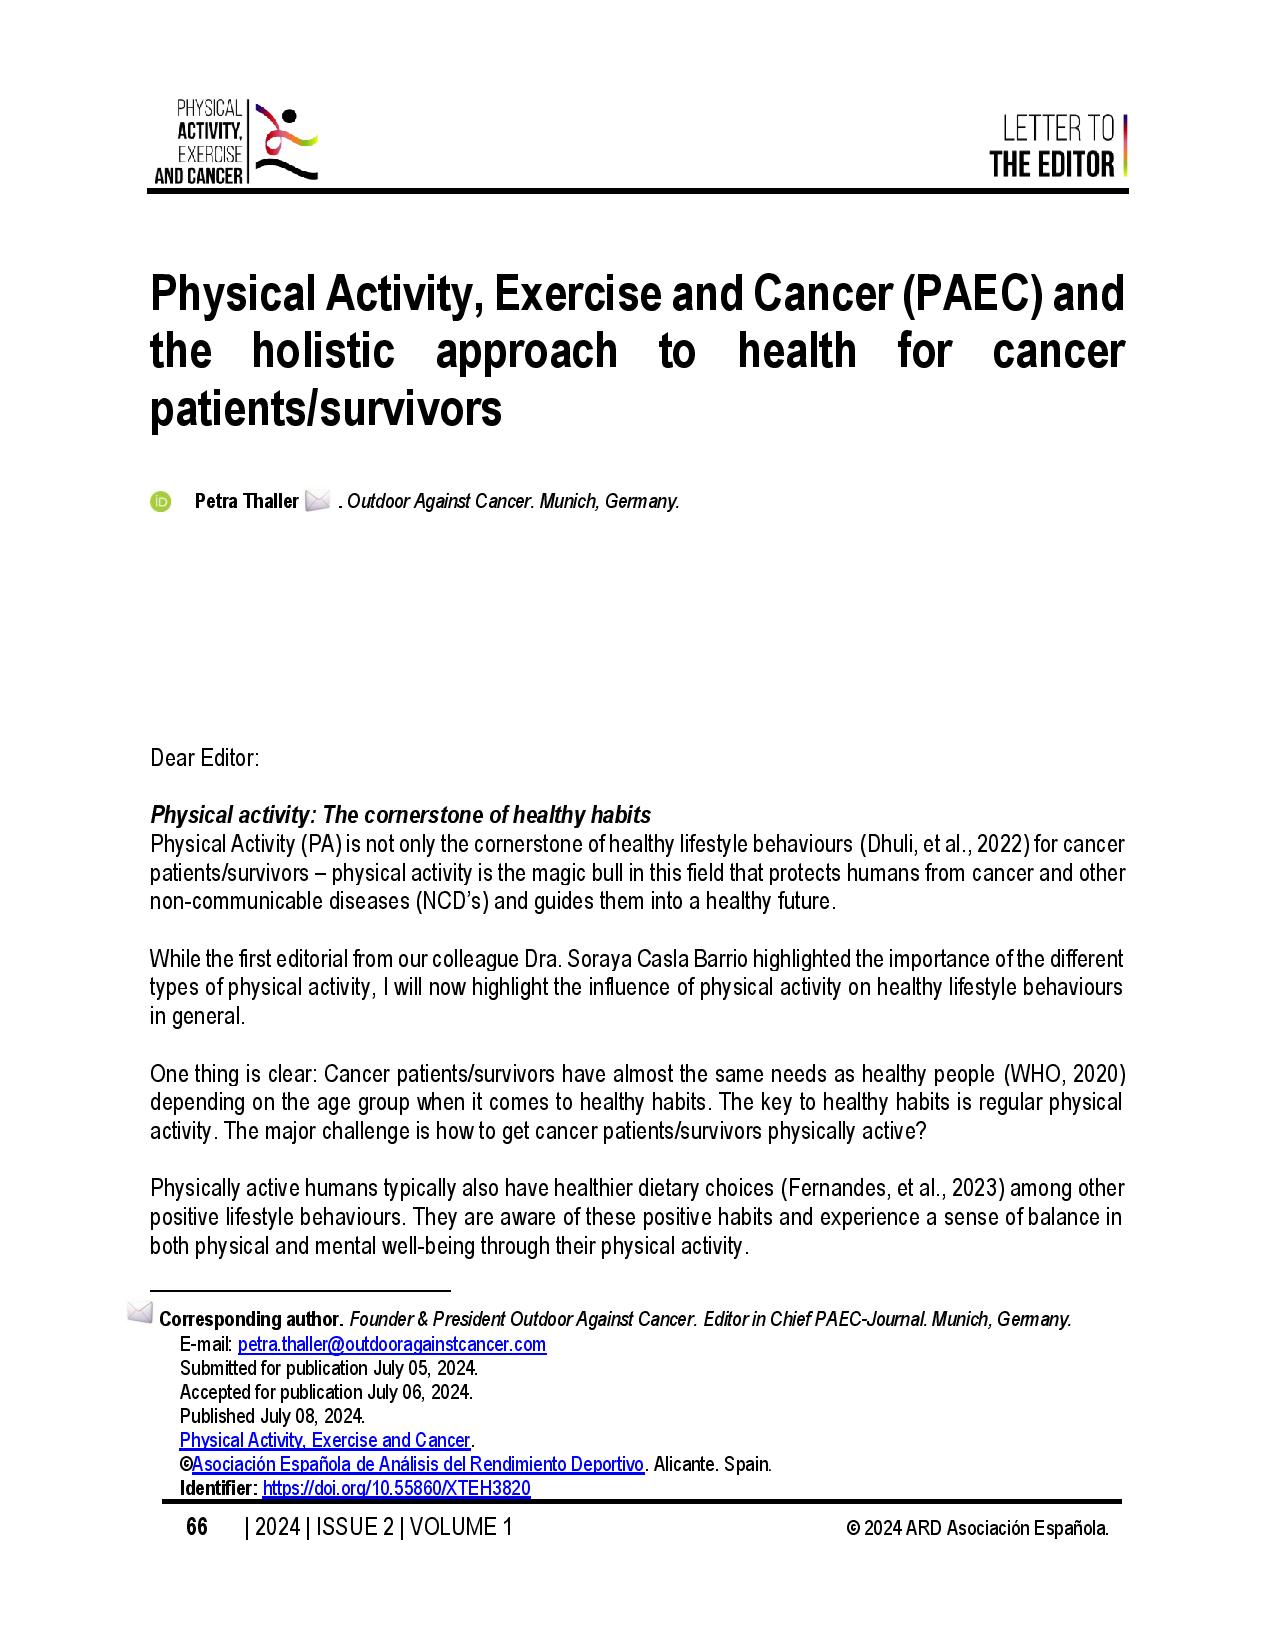 Physical Activity, Exercise and Cancer (PAEC) and the holistic approach to health for cancer patients/survivors